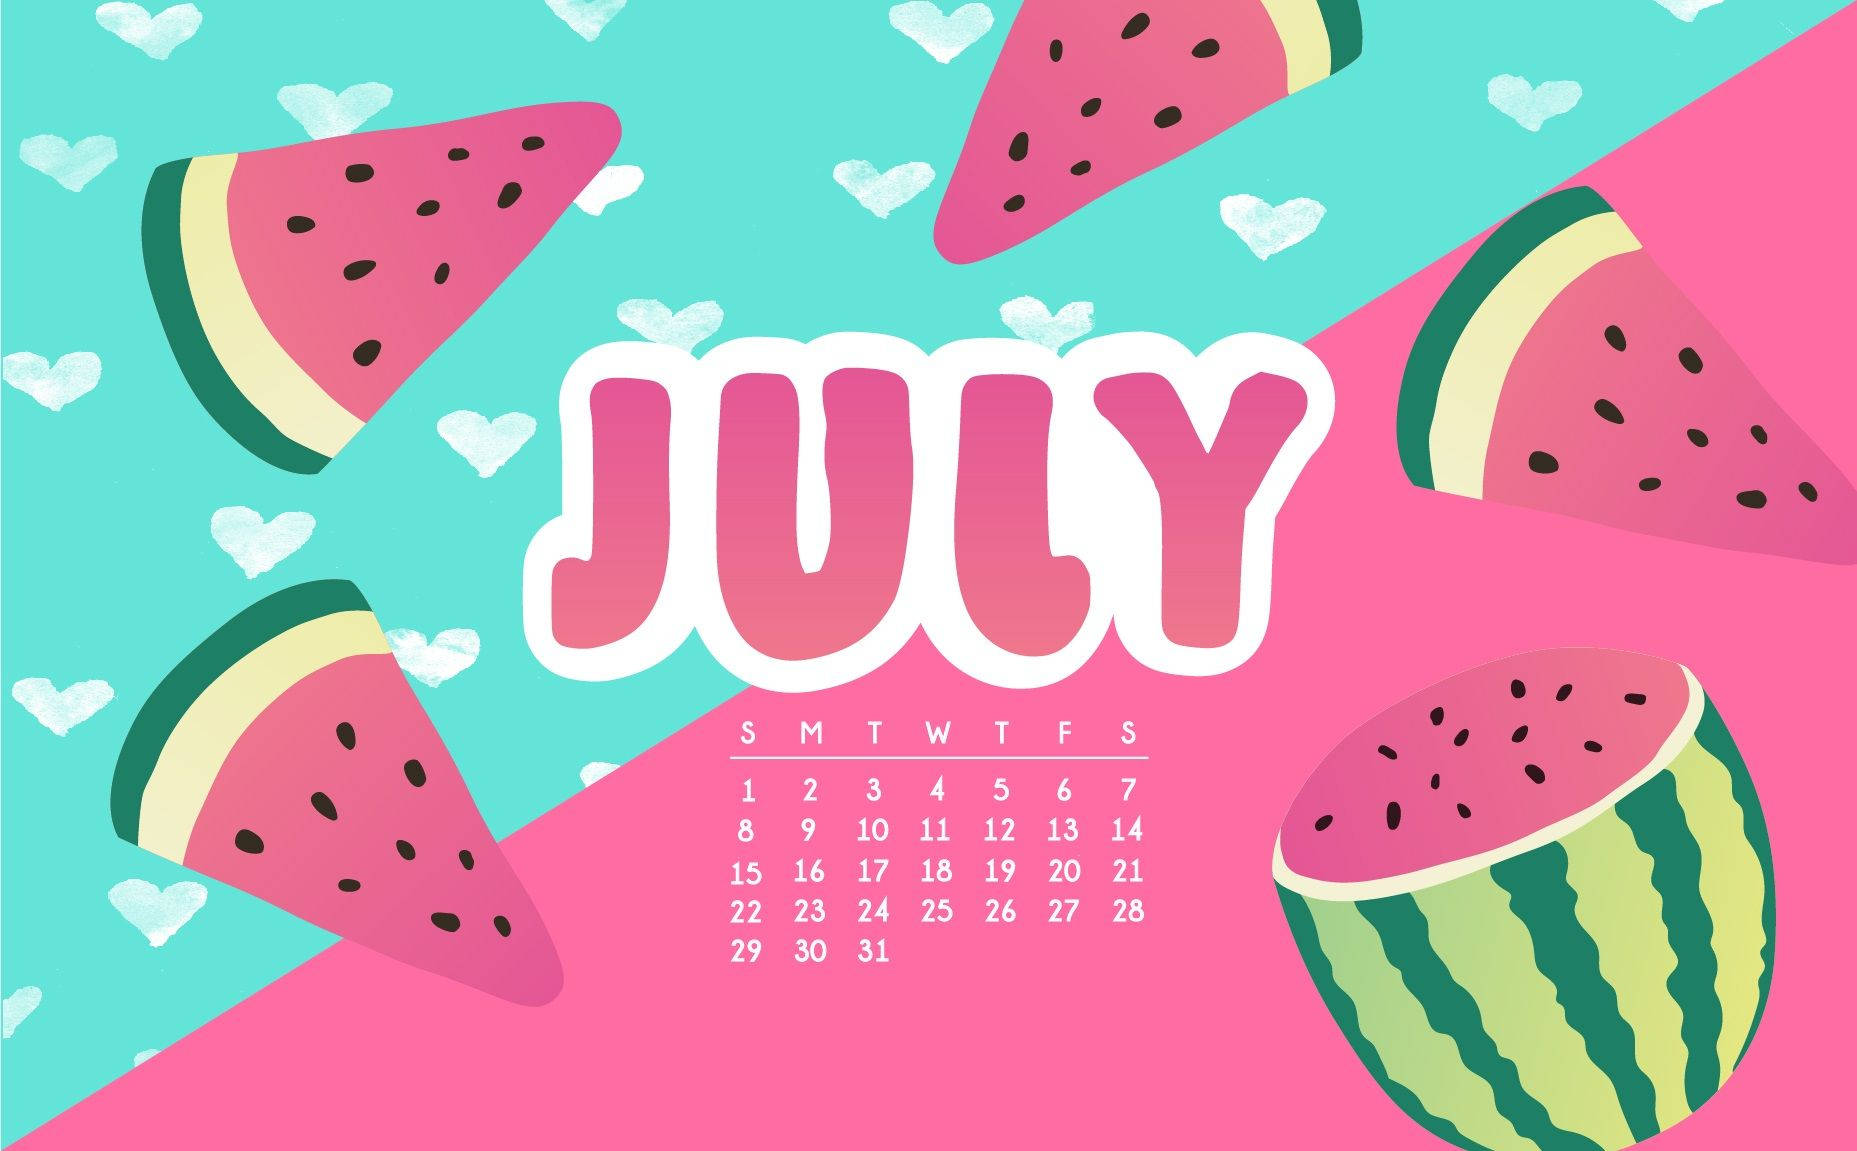 Cool off this July with a fresh watermelon! Wallpaper